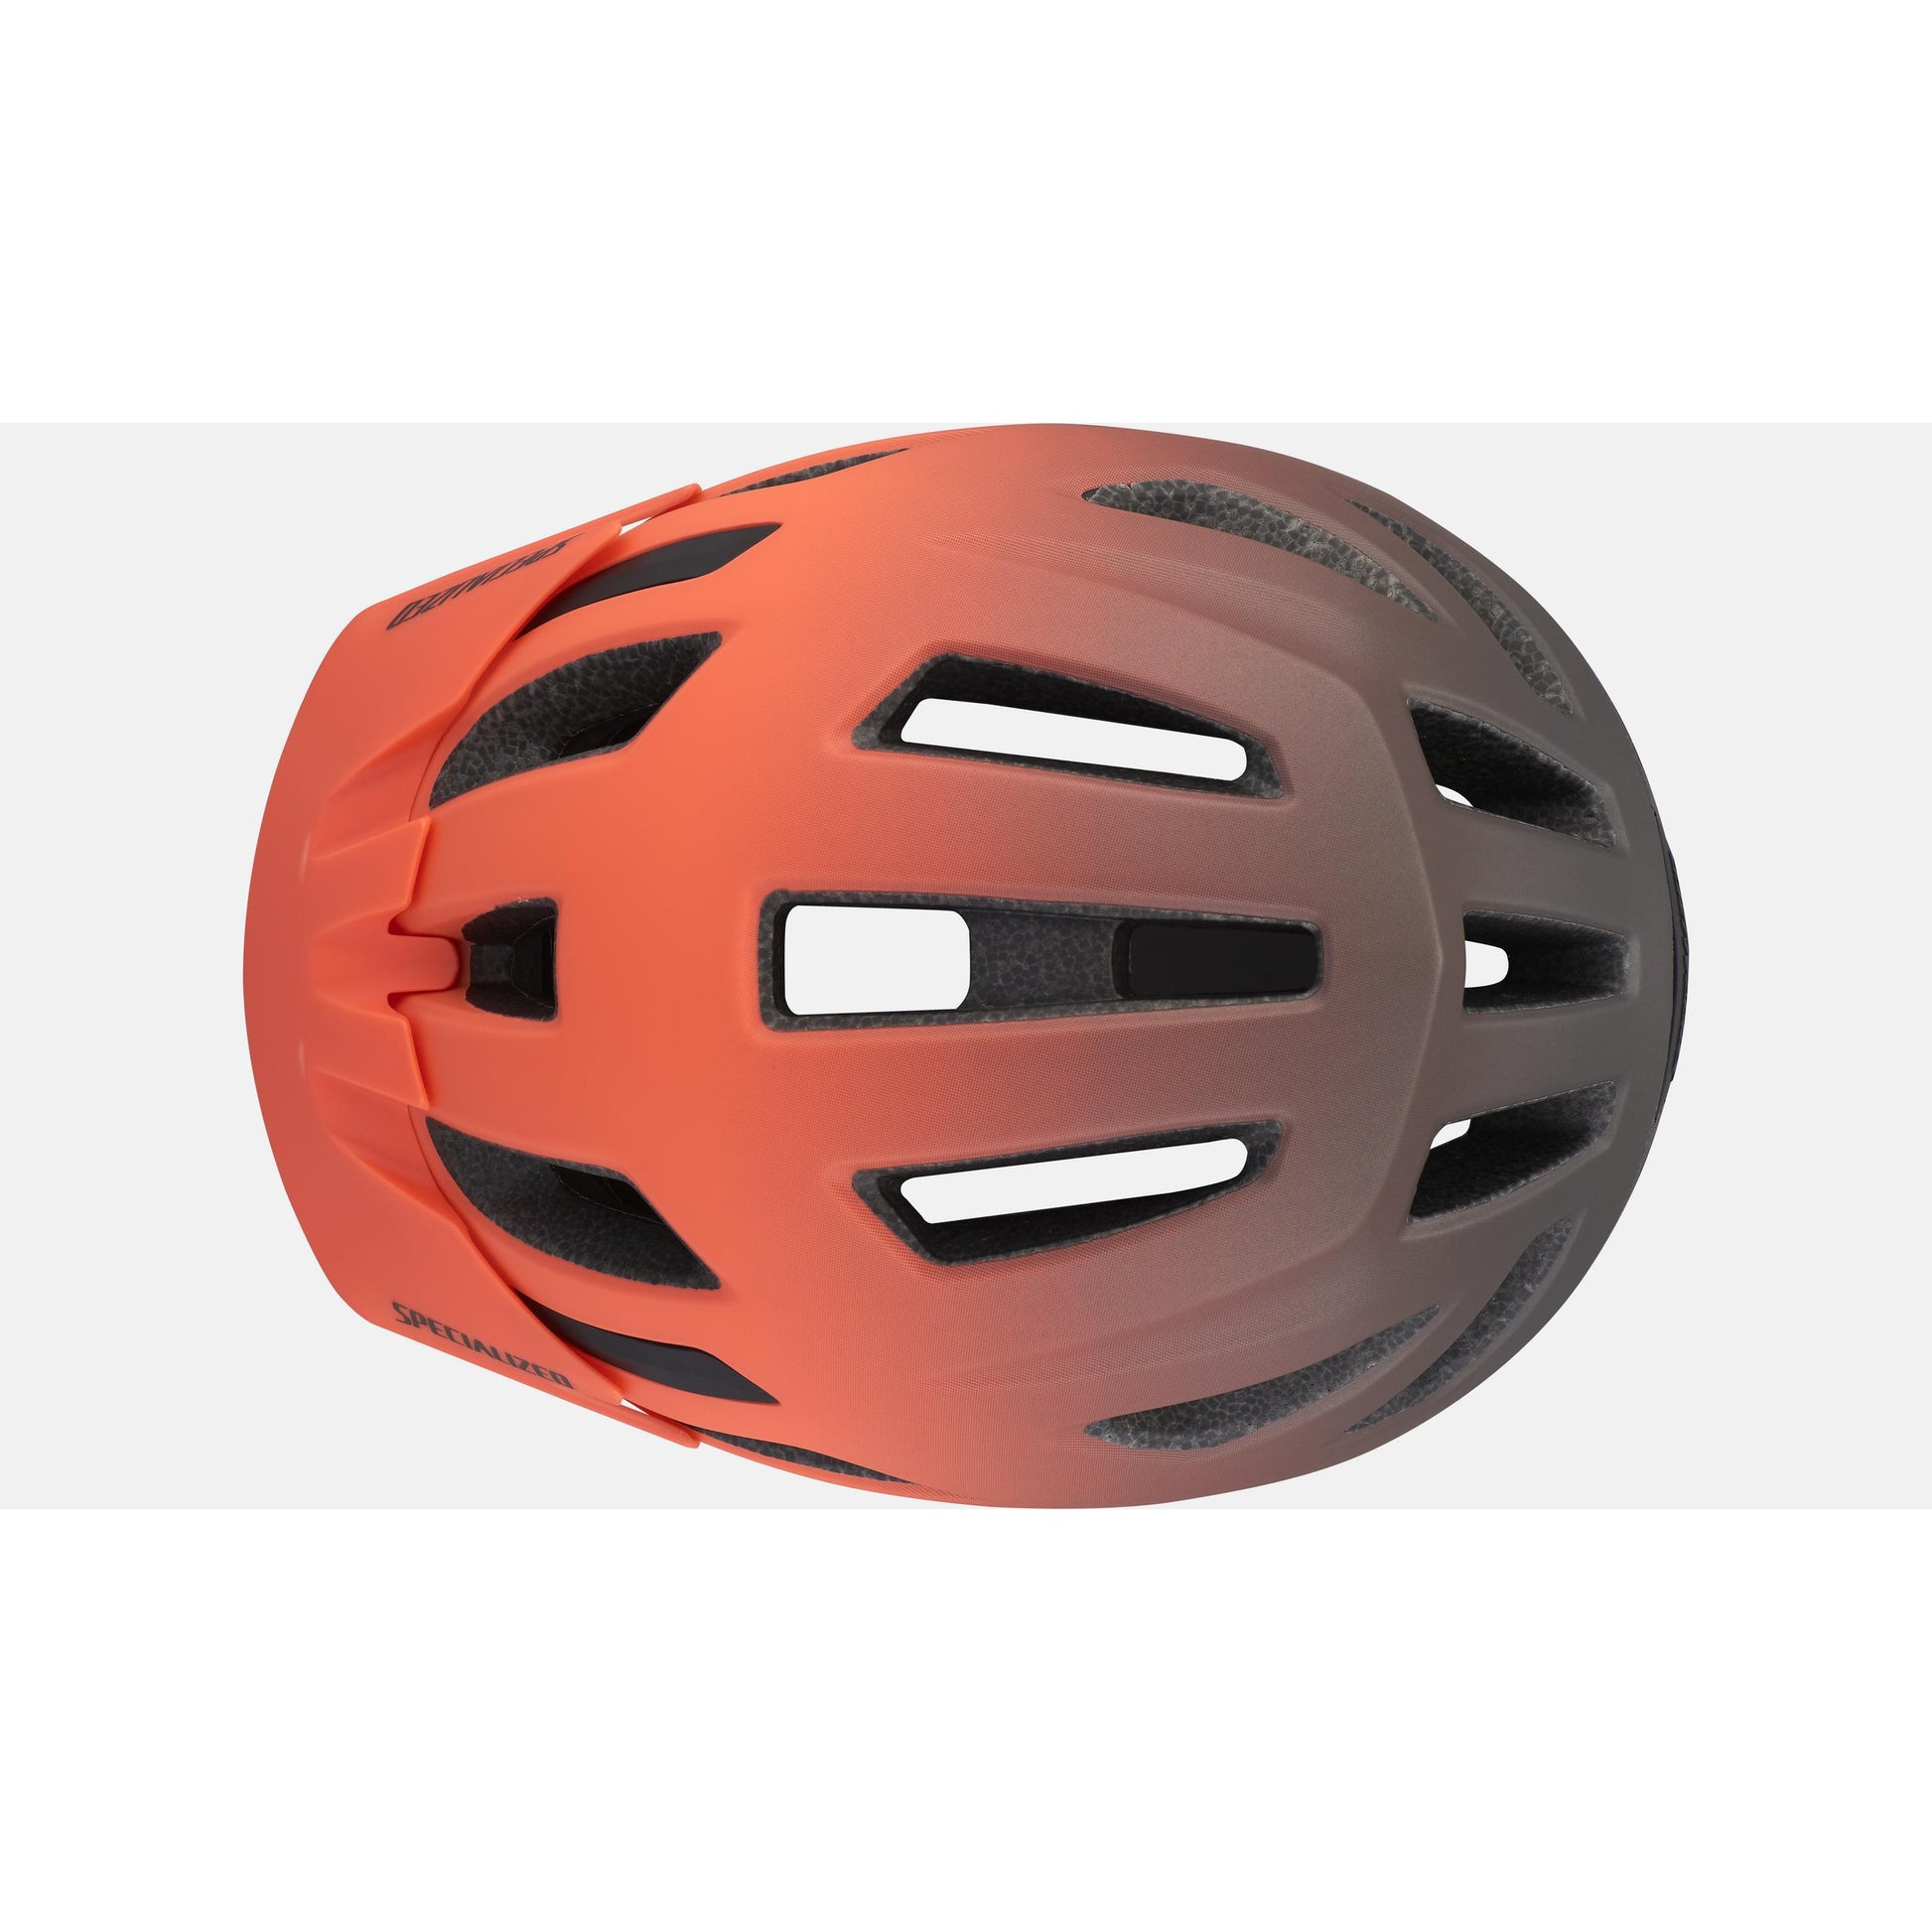 Specialized Shuffle Child Standard Buckle - Helmets - Bicycle Warehouse